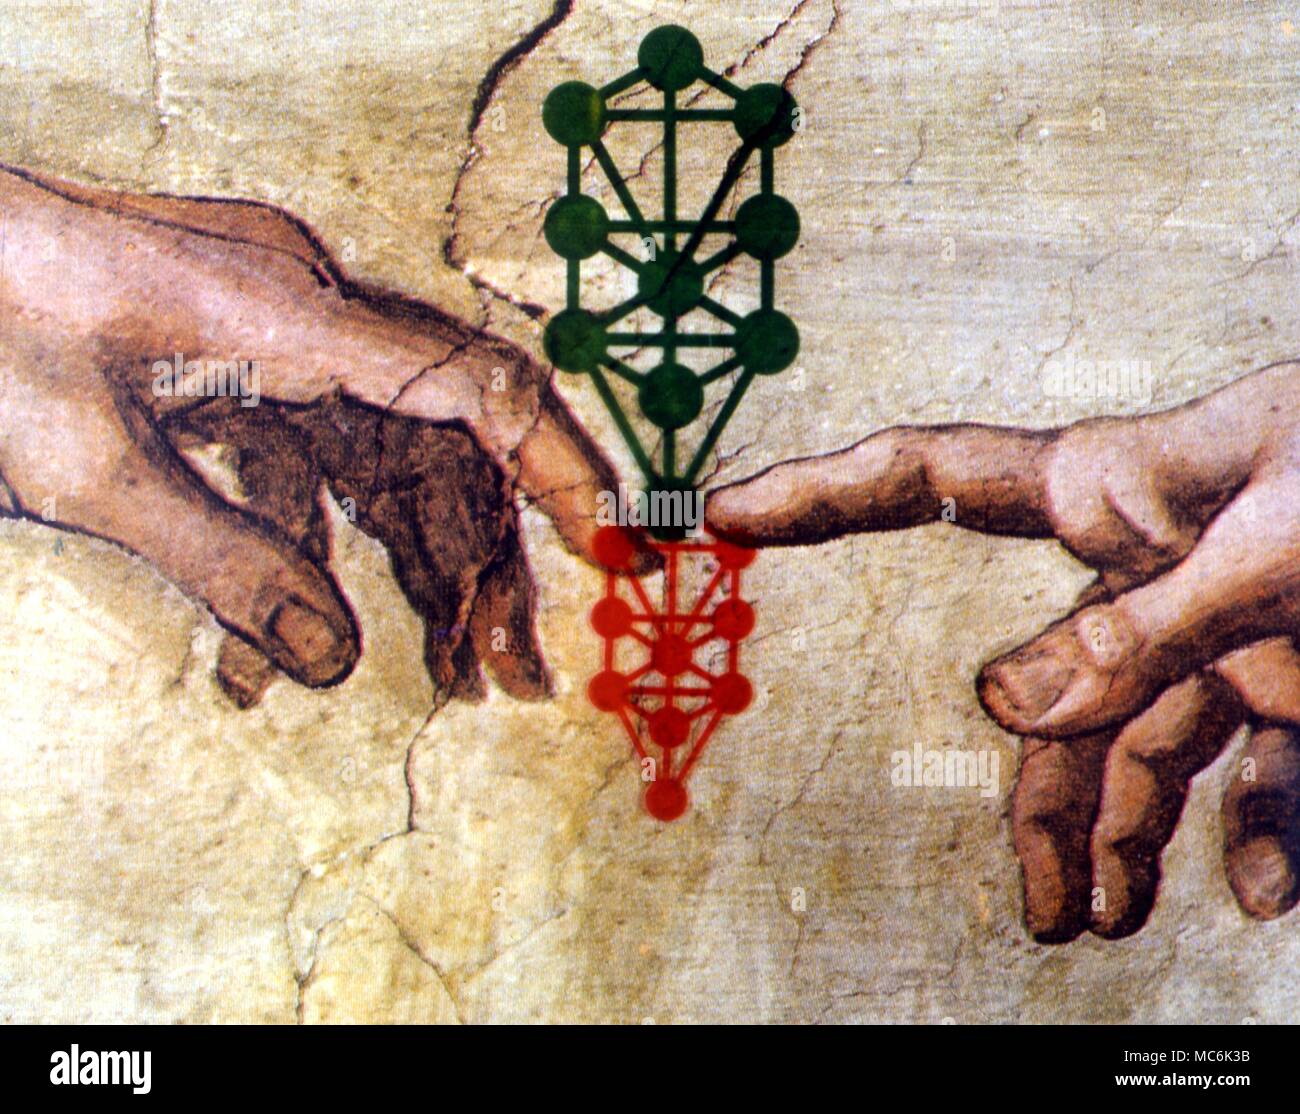 Cabbala Sephirothic Tree and Creative Hand Sephirothic Tree of the Cabbalisitc system overlaid on the famous detail of the hand of God touching that of Adam Cabbala n : sometimes called Kabbalah has two meanings; the first being a body of mystical teachings of rabbinical origin, which are based on an esoteric interpretation of the Hebrew Scriptures. The Cabbala is also known as a secret doctrine resembling these teachings. A traditionally secret esoteric or occult matter The Sephirothic Tree consists of ten globes of luminous splendor arranged in three vertical columns and connected by Stock Photo